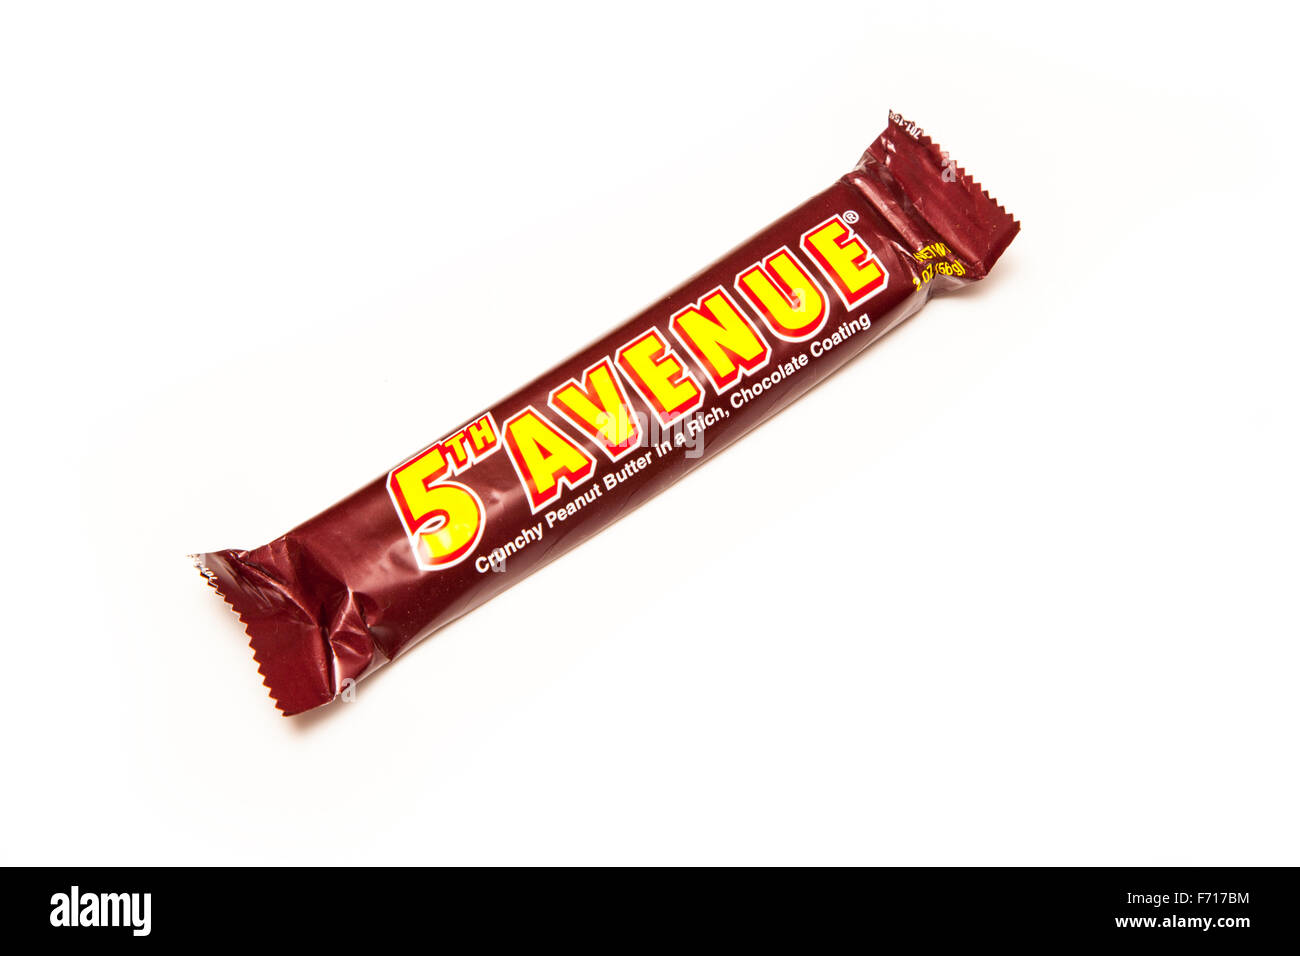 5th Avenue American candy or chocolate bar isolated on a white studio background. Stock Photo